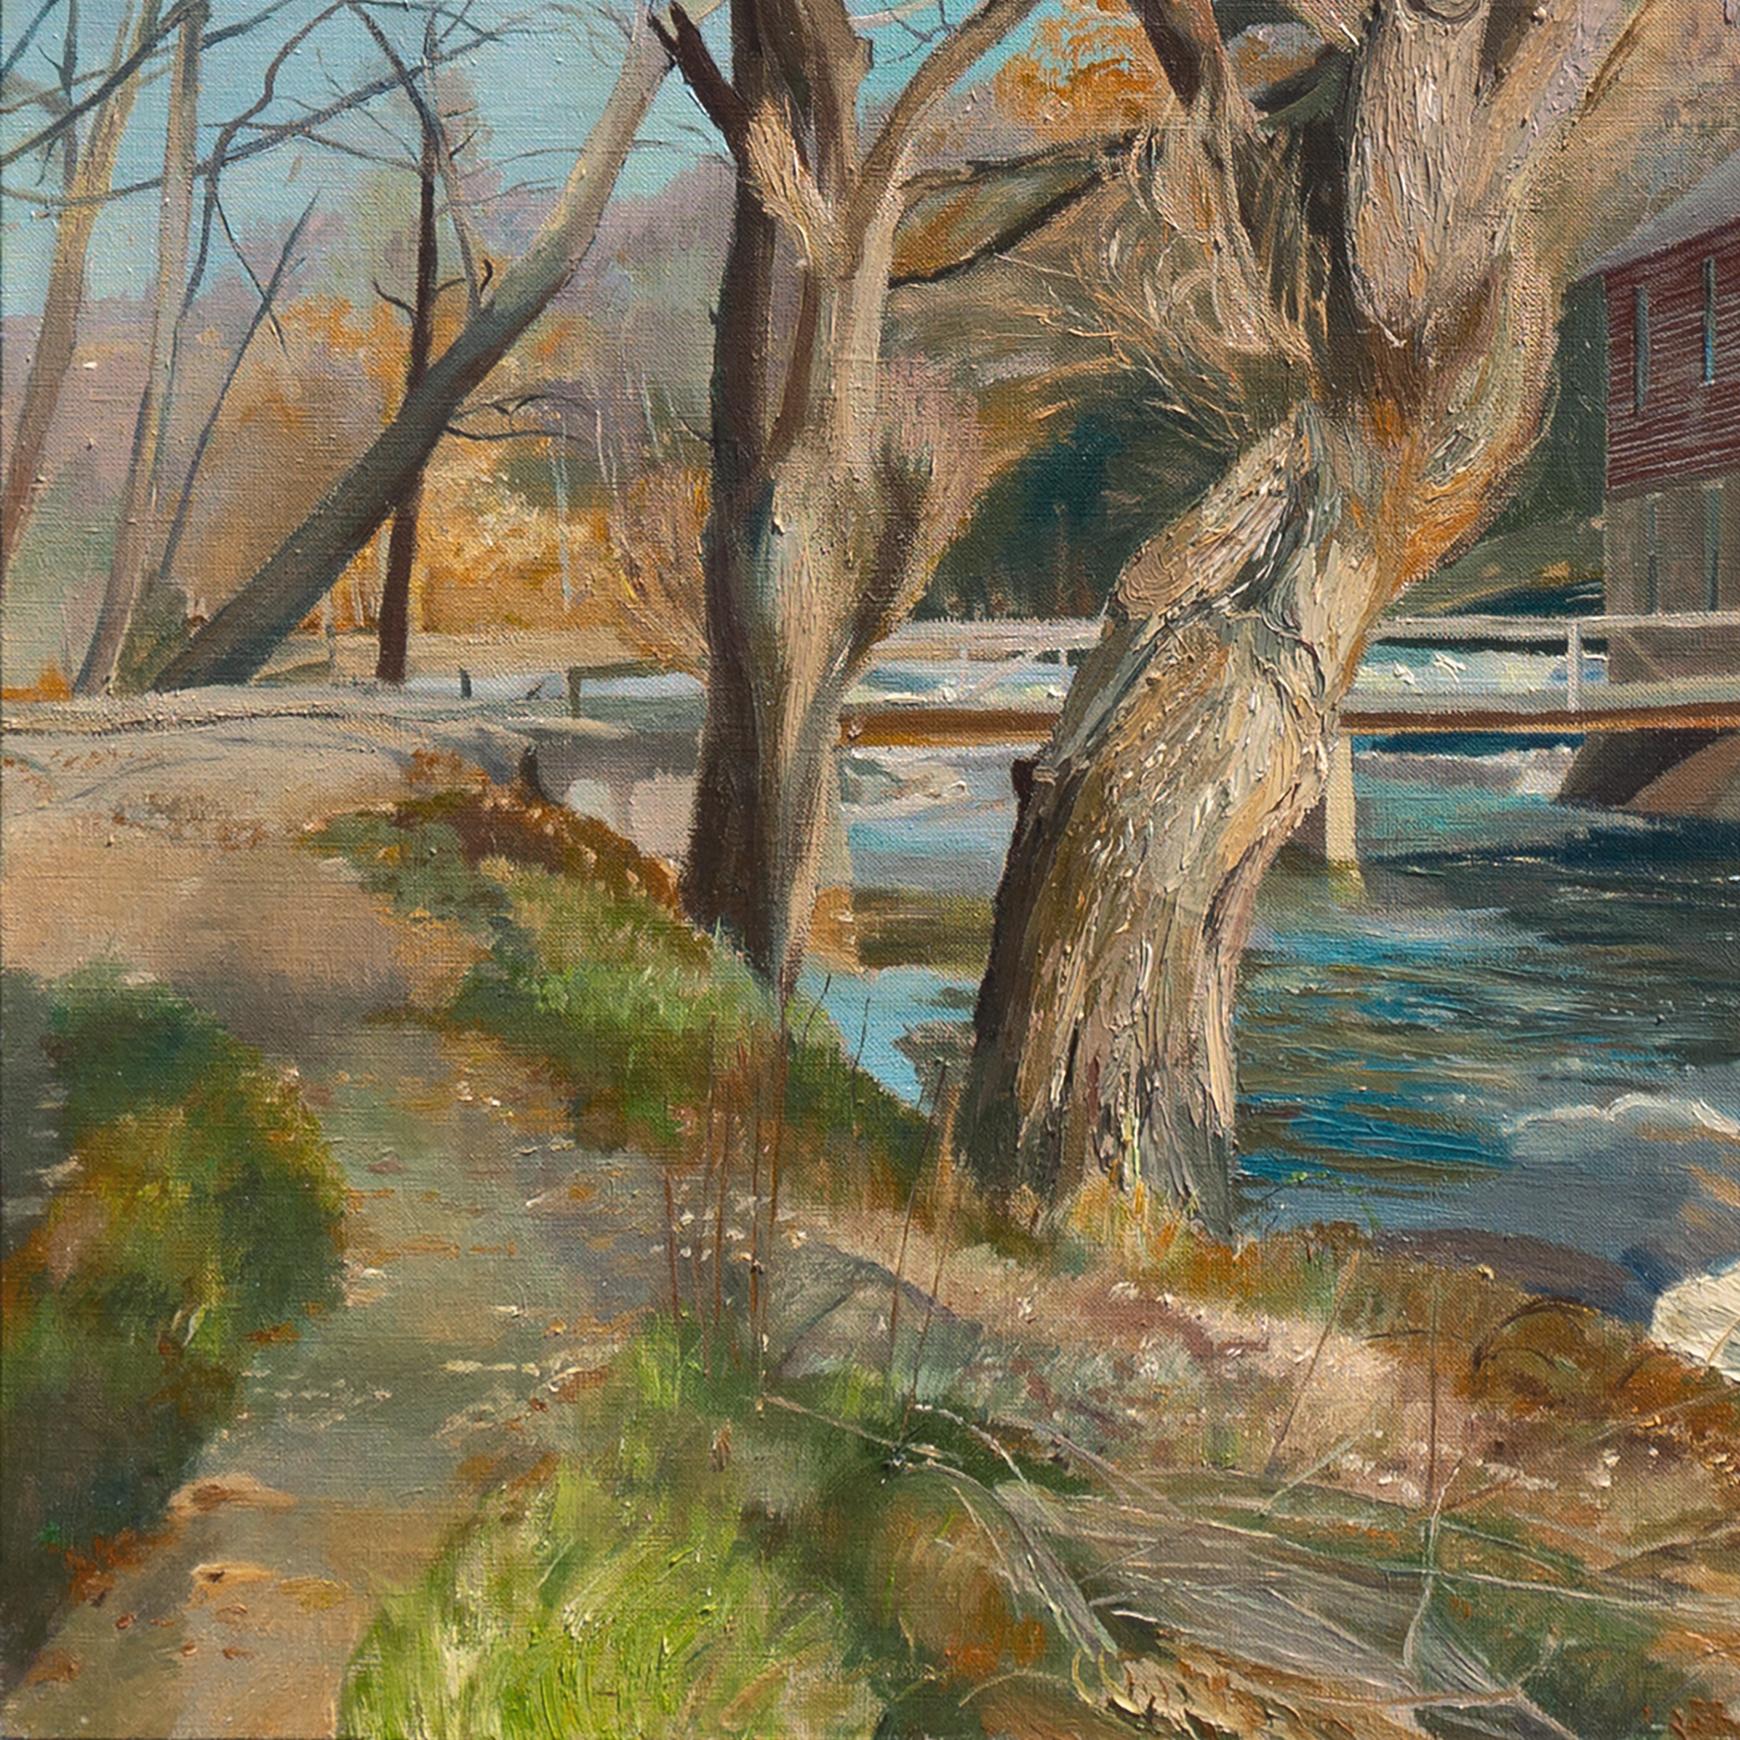 Signed lower right, 'George L. Beidler' (American, 1917-1981) and dated 1956. Additionally signed, verso, on stretcher bar and titled on artist label, 'Old Minisink Mill, Marshall's Creek, Pennsylvania' with artist address. 

Known also as